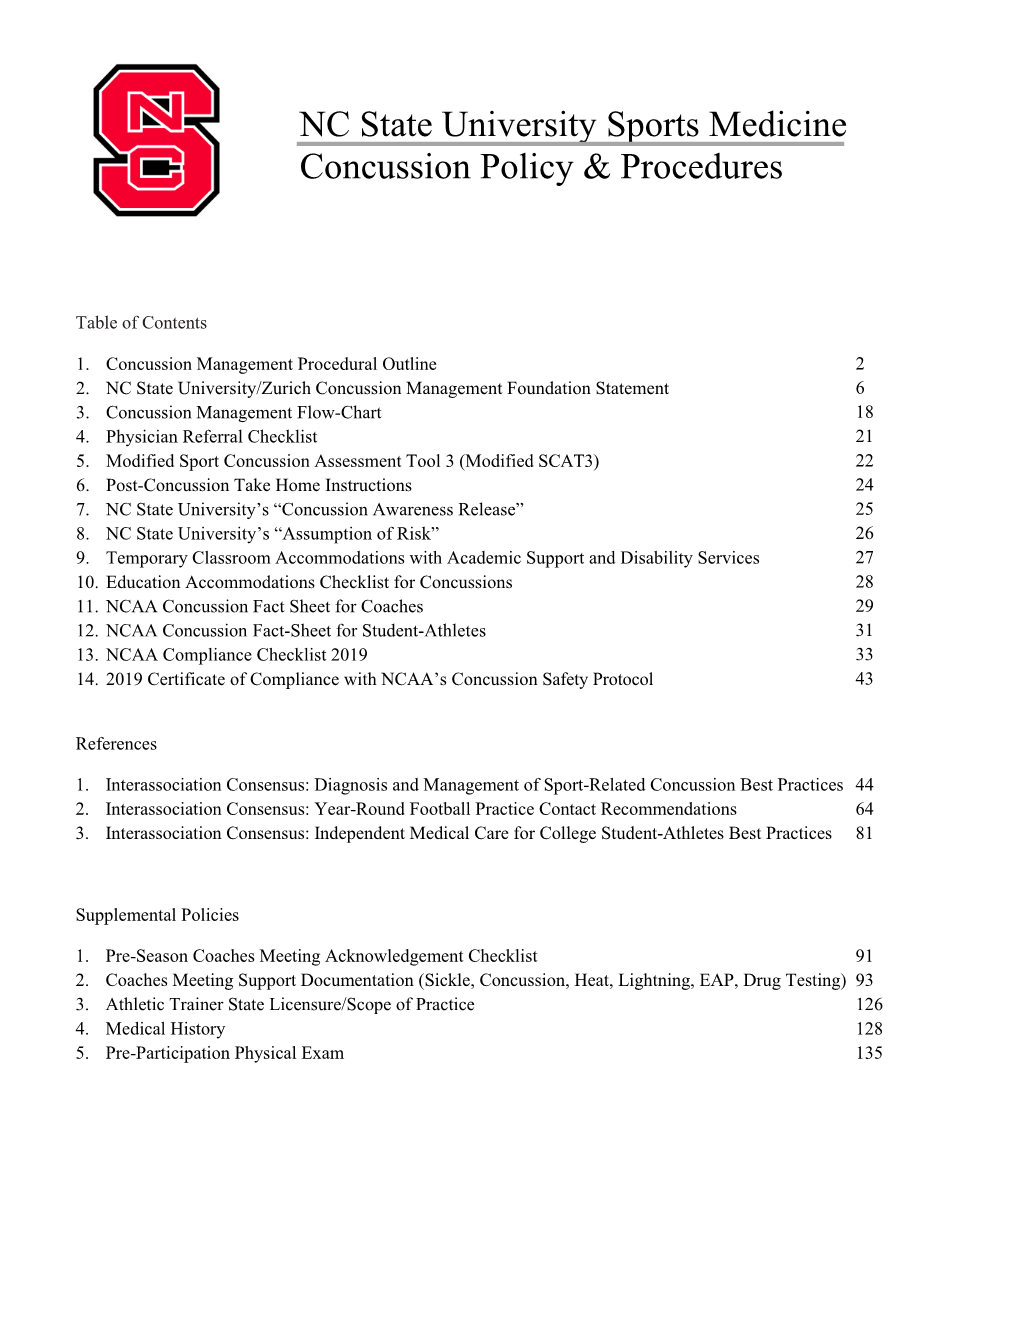 NC State University Sports Medicine Concussion Policy & Procedures